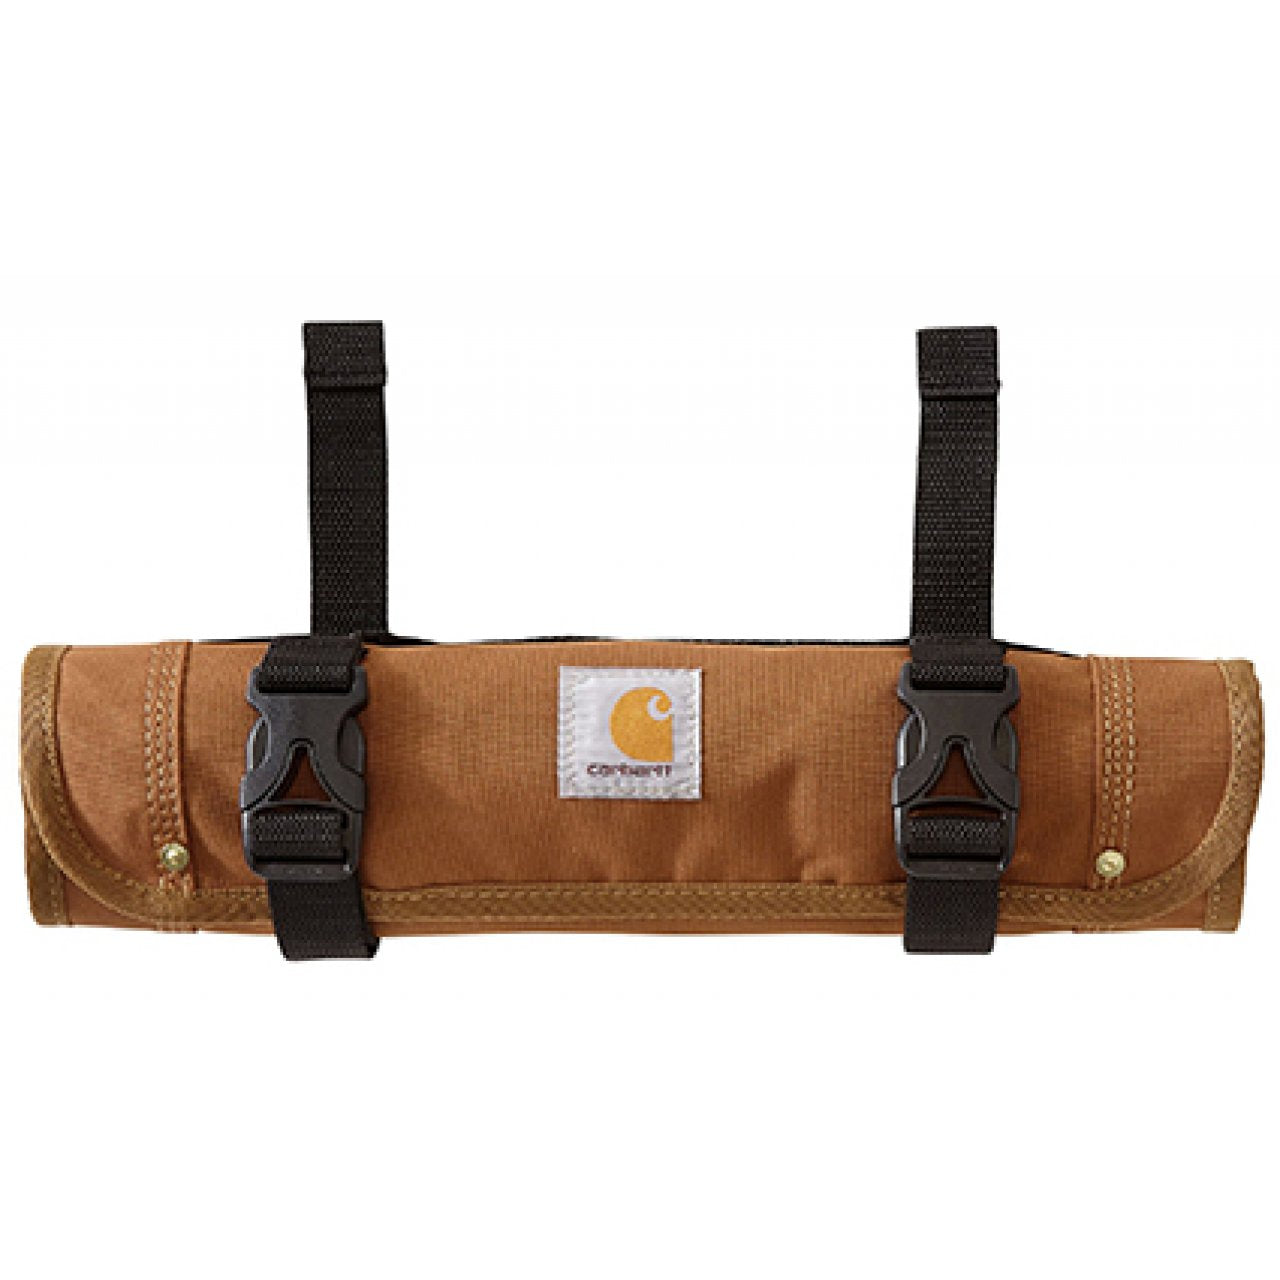 Flat-Out Magazine | Carhartt Tool Roll - Brown – Flat-Out Magazine